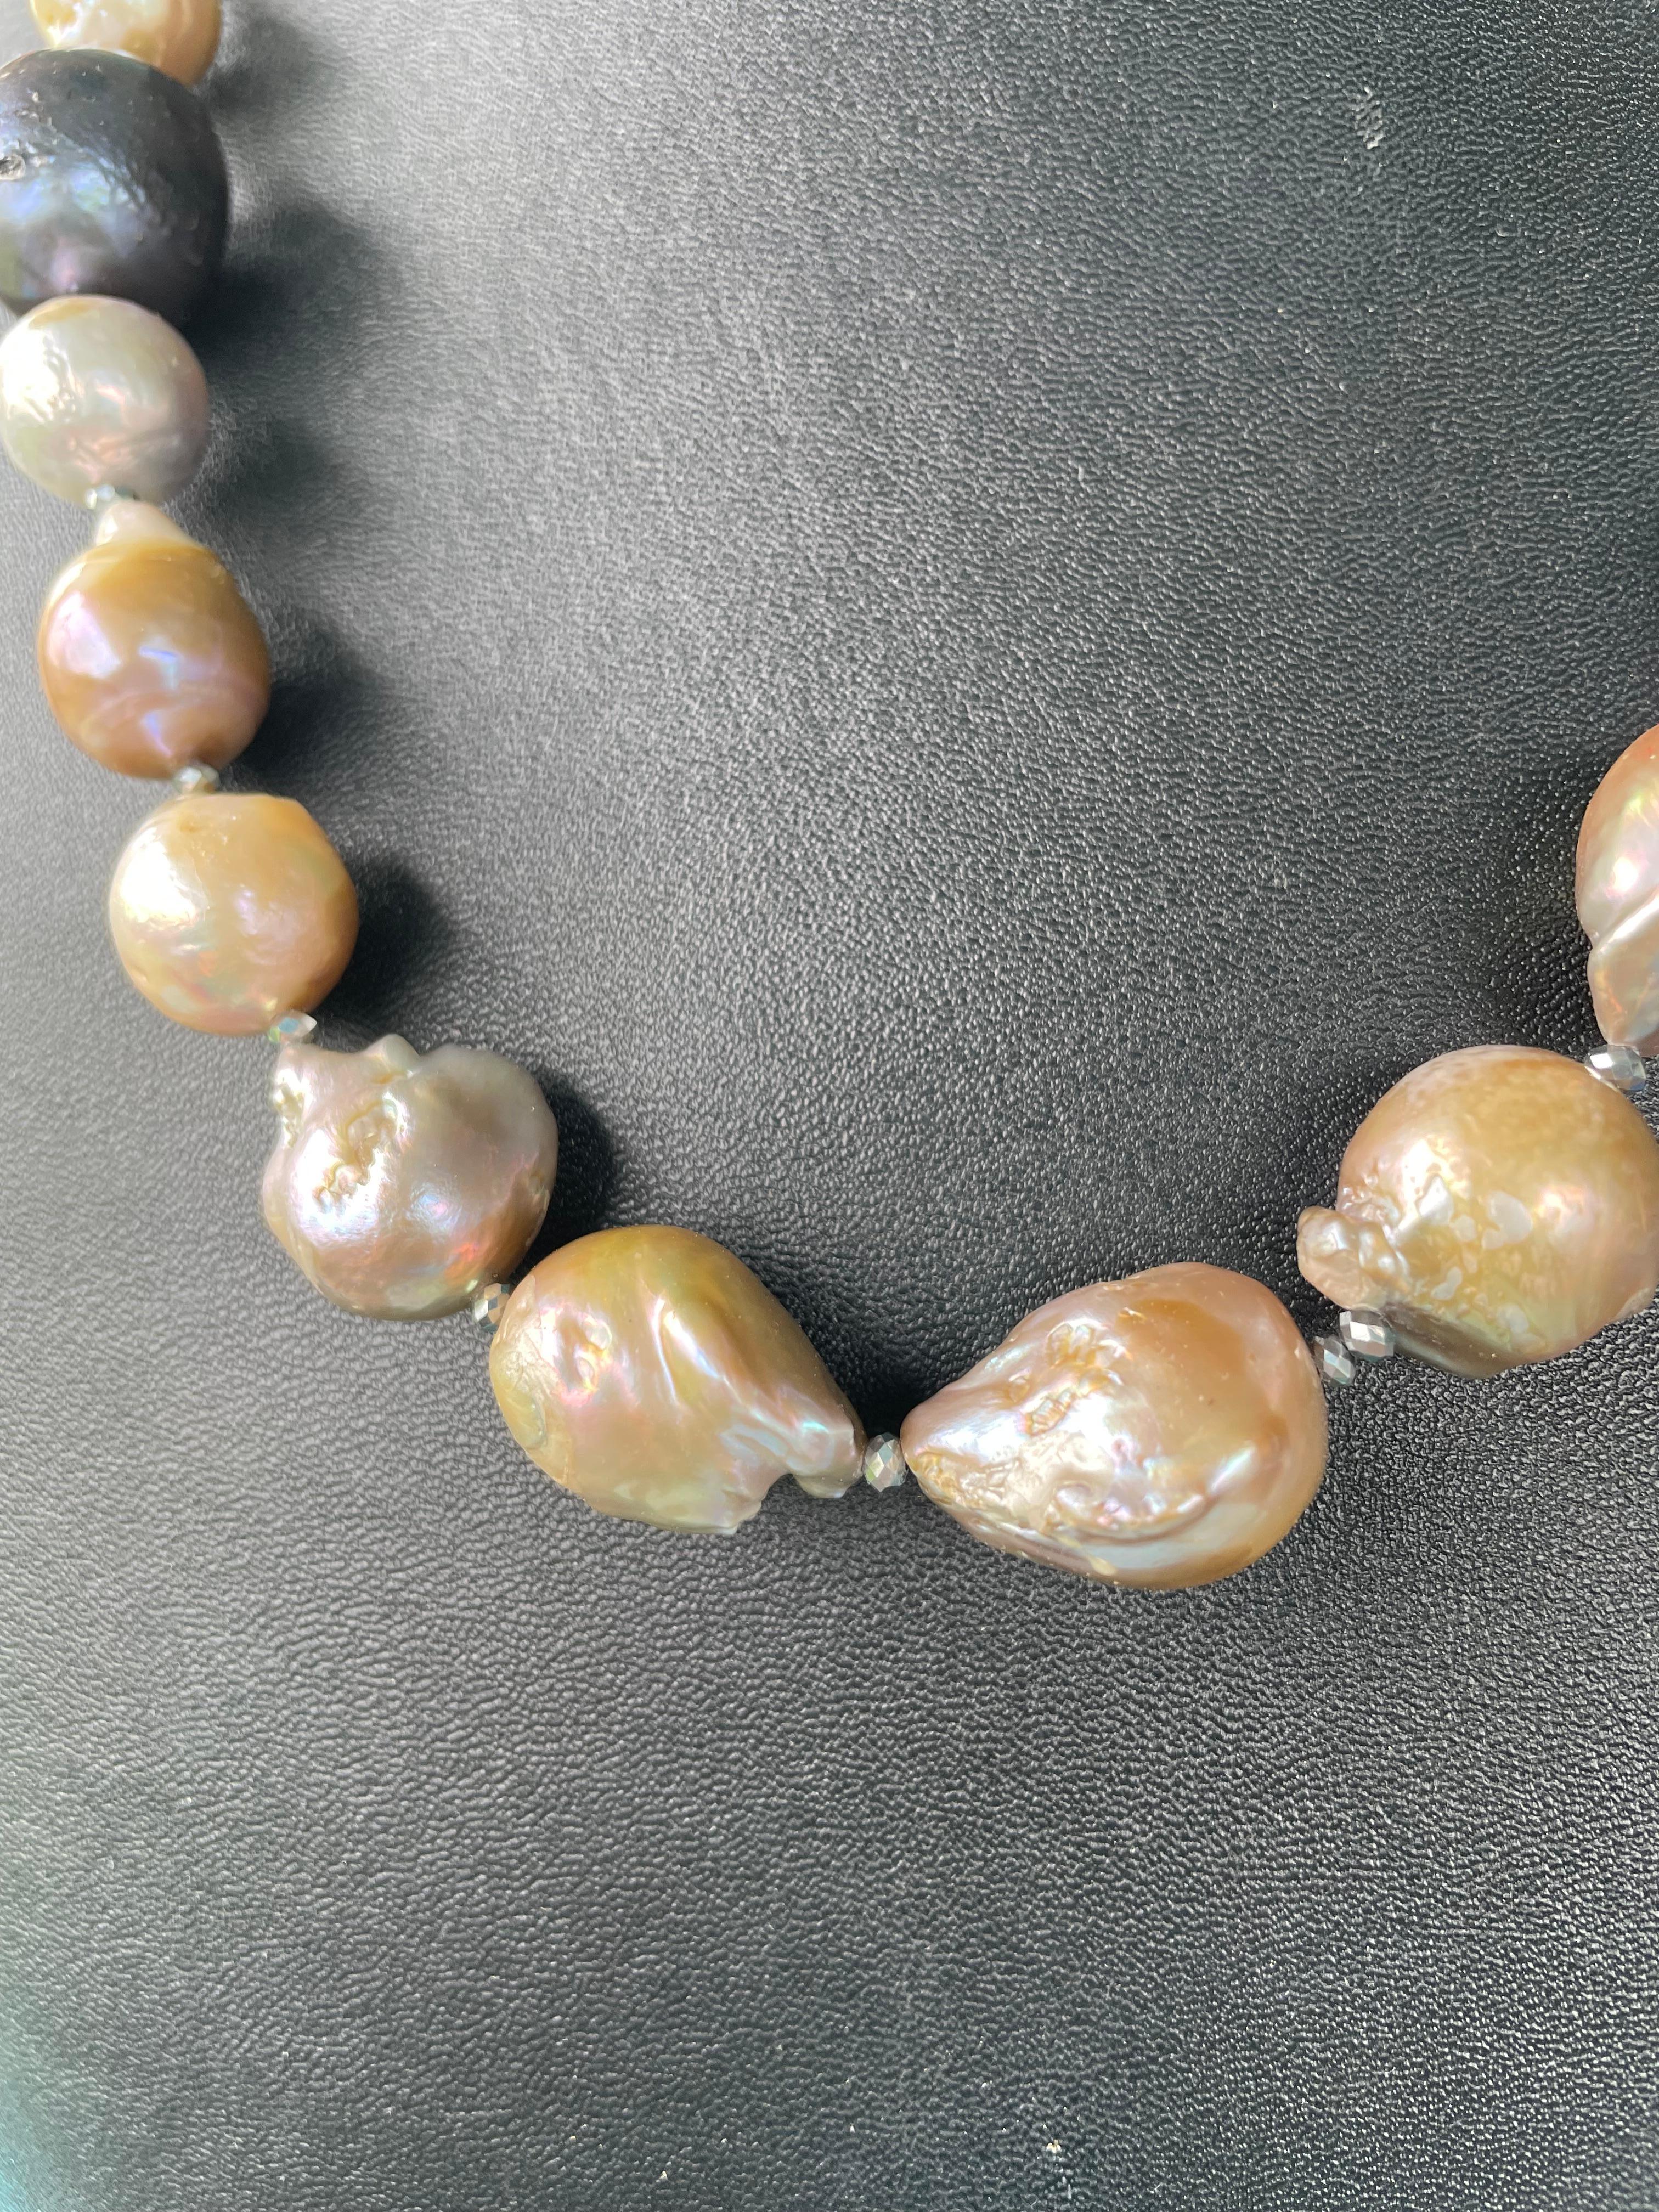 Lorraine’s Bijoux offers a Large multicolored pastel Baroque Pearl necklace. Each of these pearls is unusual and all are very different from each other. The colors vary from  peacock accent pearls to many shades of gold, tan, white, lavender, cocoa,